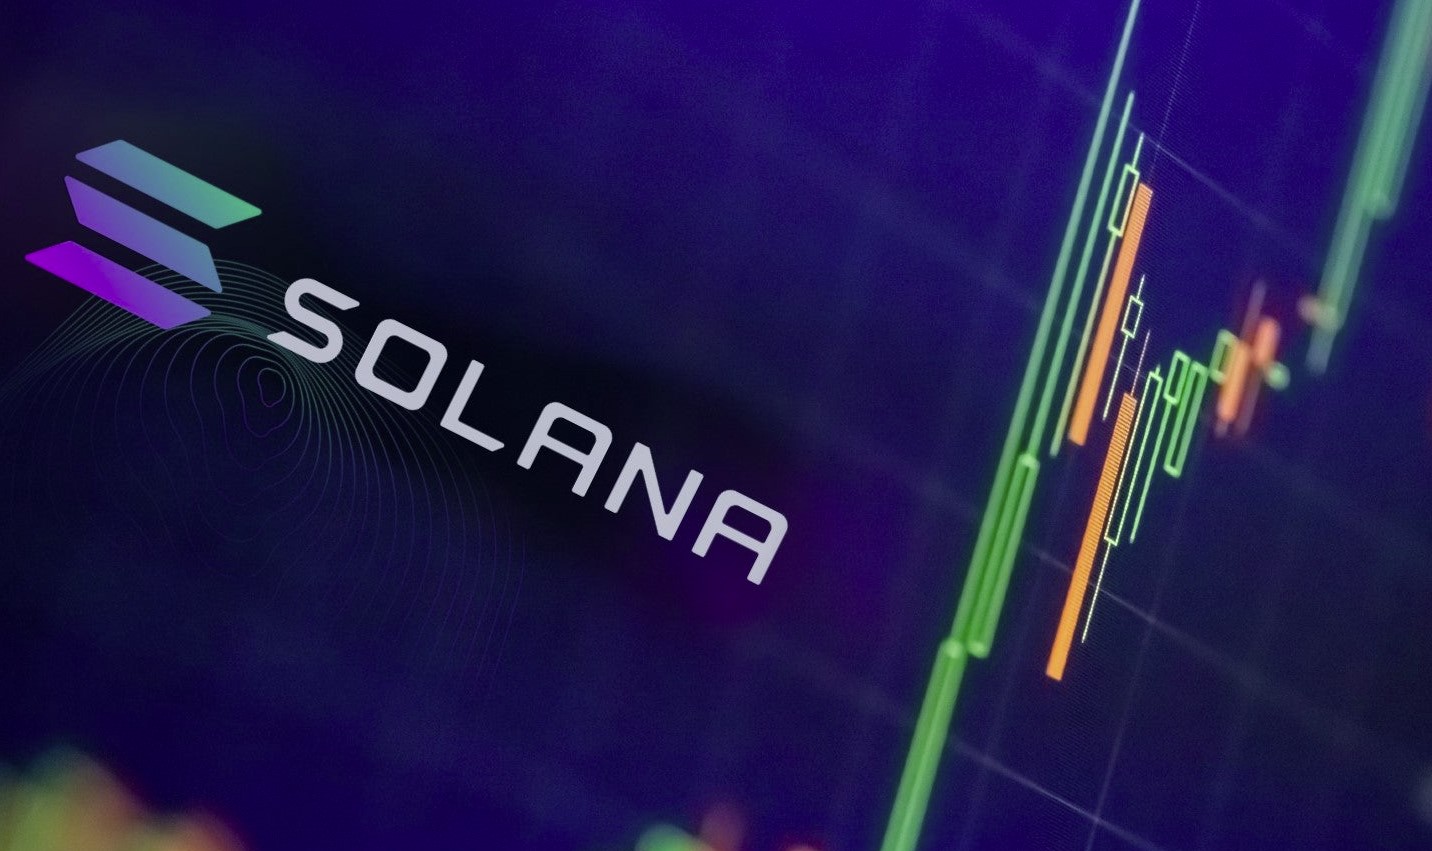 Solana 'hot' wallets are being hacked, draining crypto funds